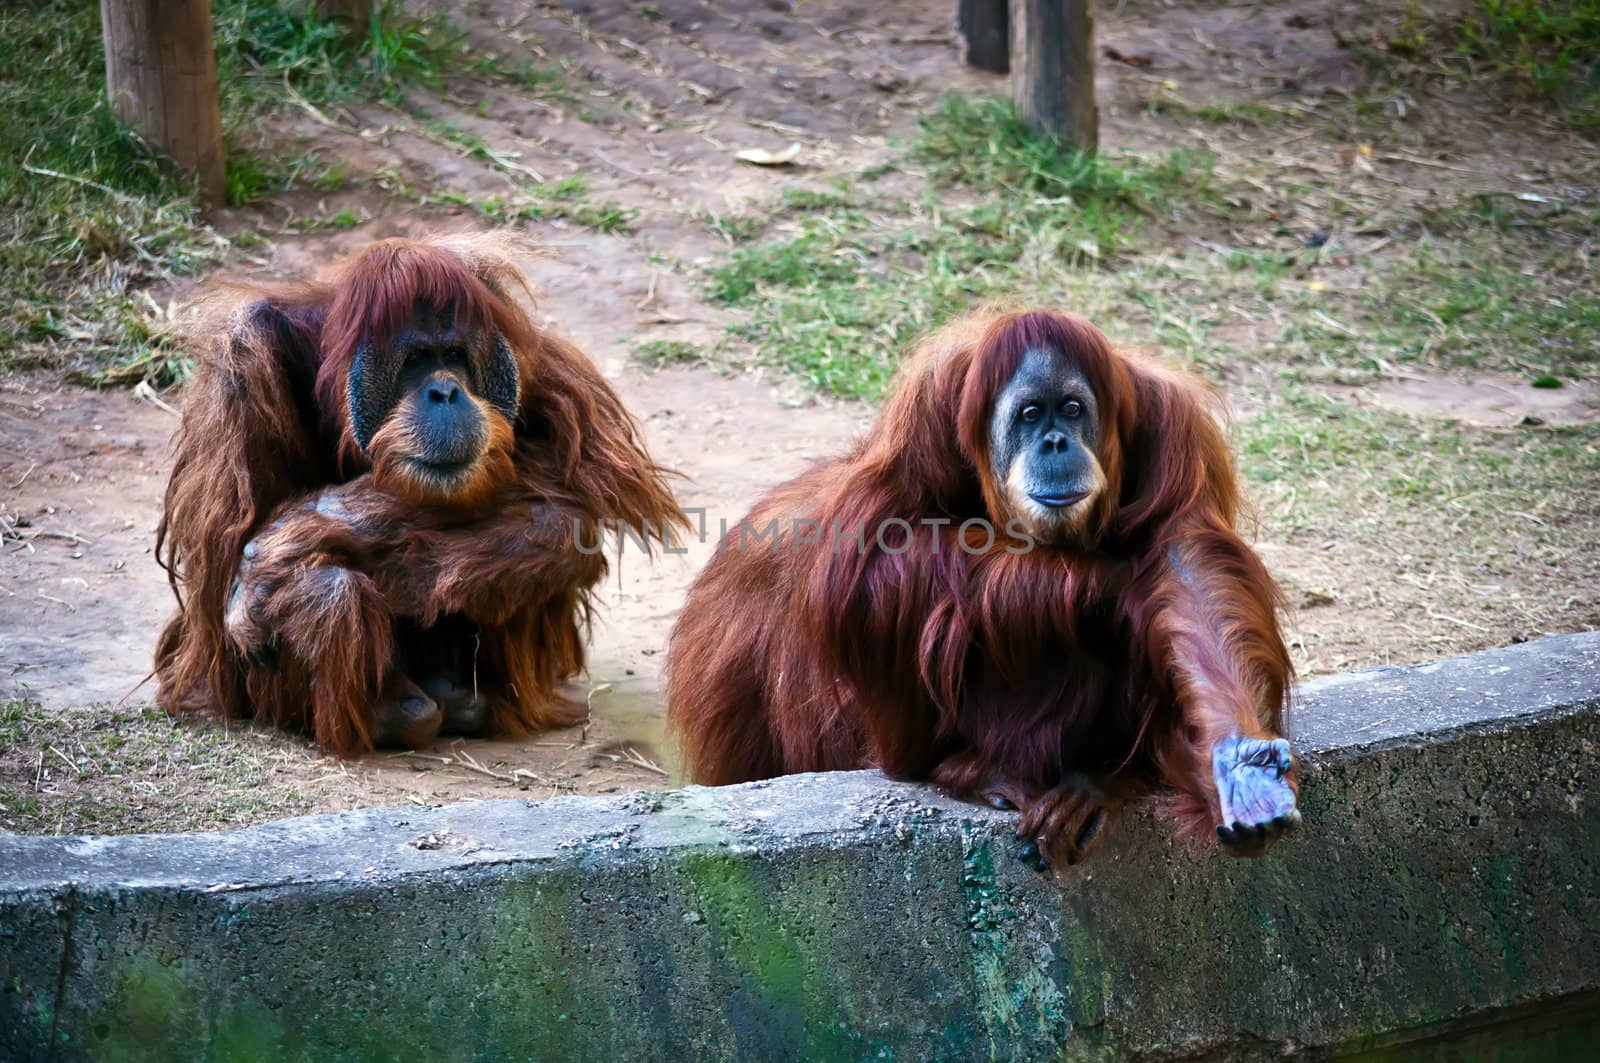 Family orangutans. Female with outstretched hand.